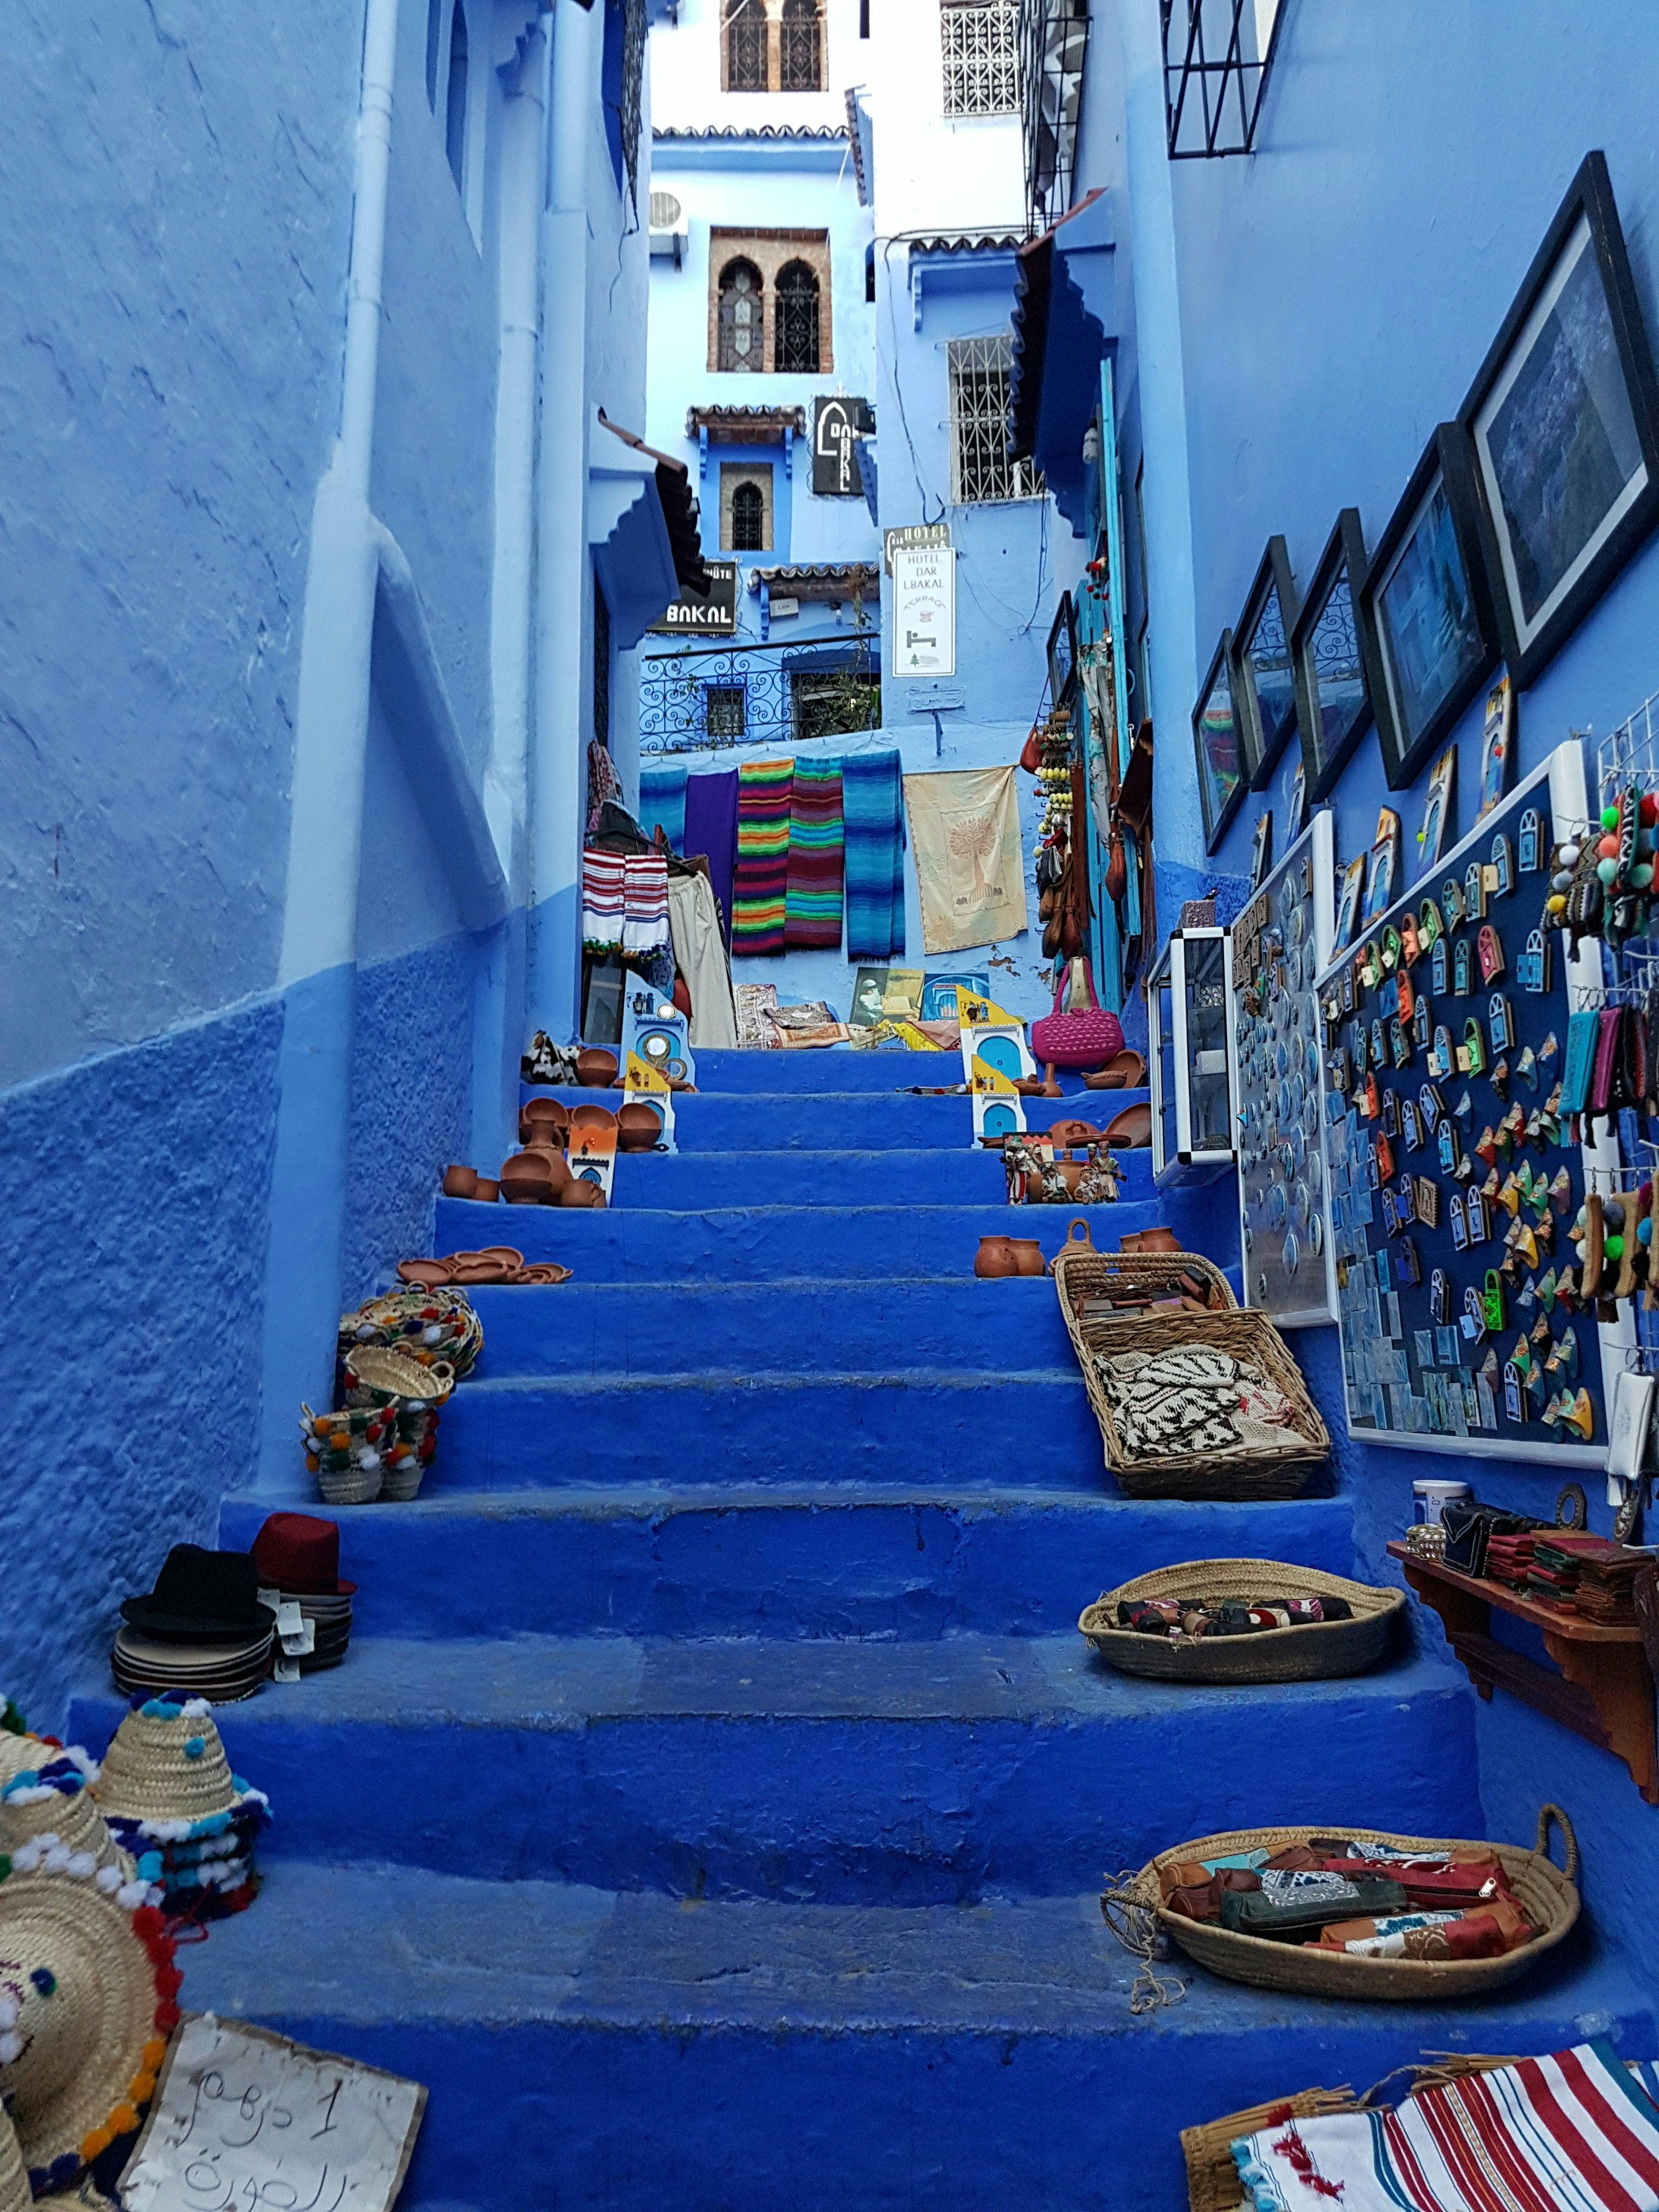 Narrow blue street in Chefchaouen, Morocco.